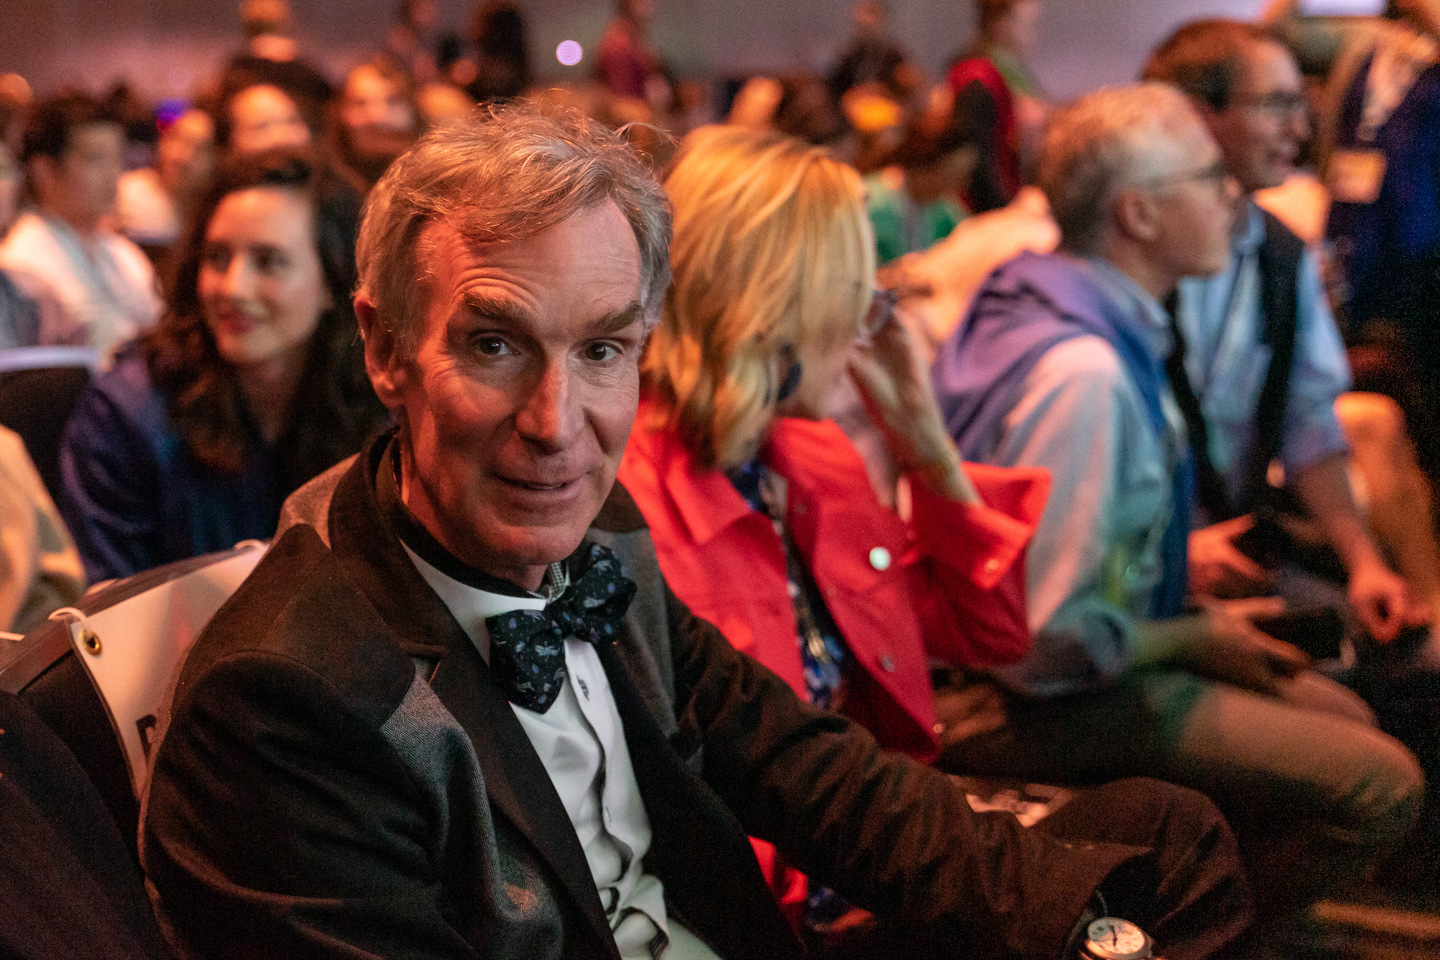 Bill Nye in the audience at the Alexandria Ocasio-Cortez and the New Left Featured Session – photo by John Feinberg